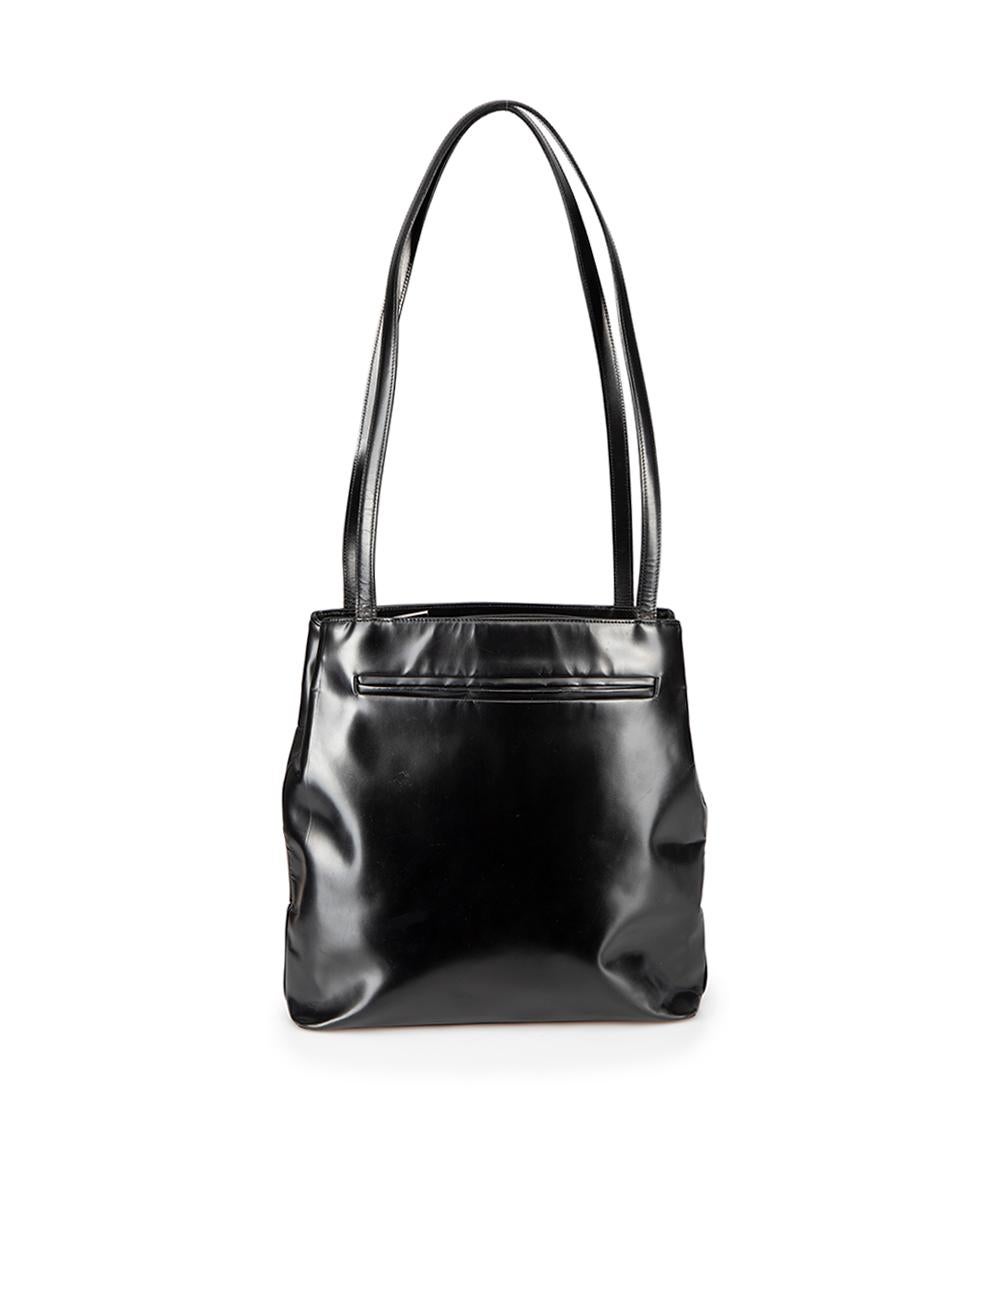 Loewe Women's Black Leather Top Handle Tote Bag In Good Condition For Sale In London, GB